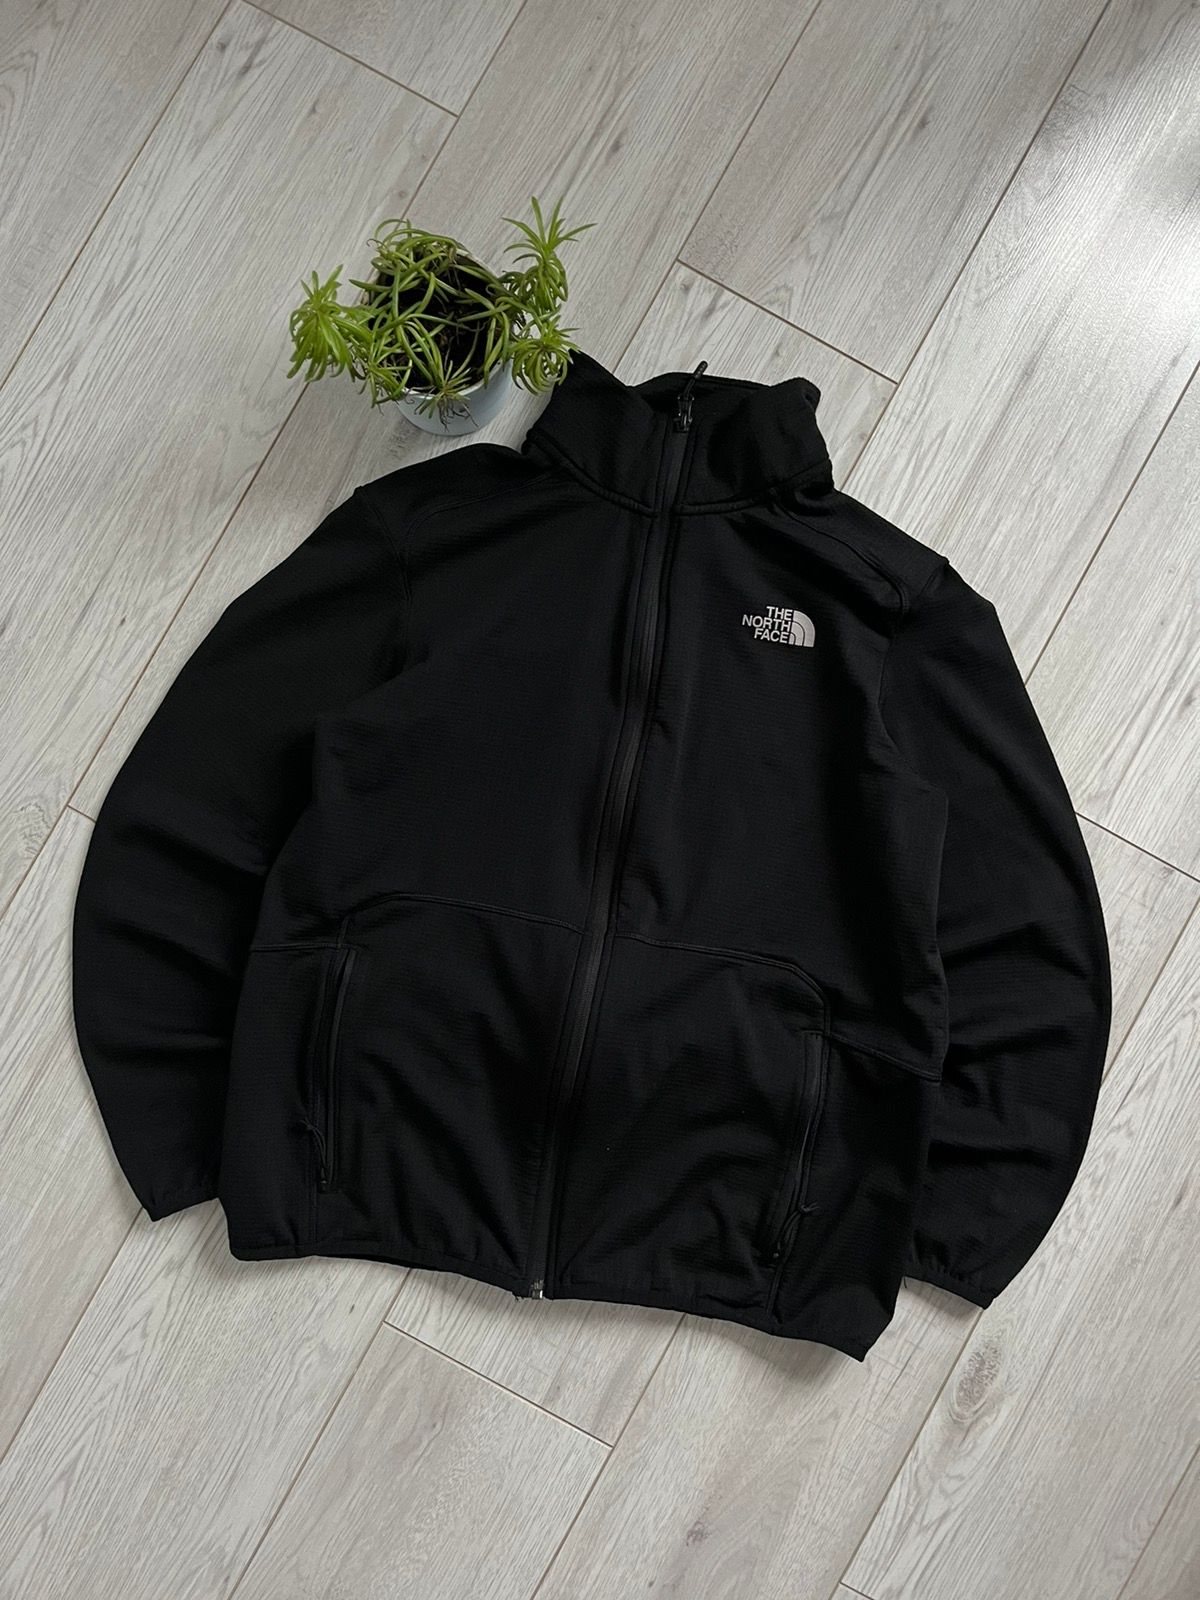 Pre-owned Outdoor Life X The North Face Sweatshirt The North Face Vintage Gorpcore Outdoor Y2k Drip In Black